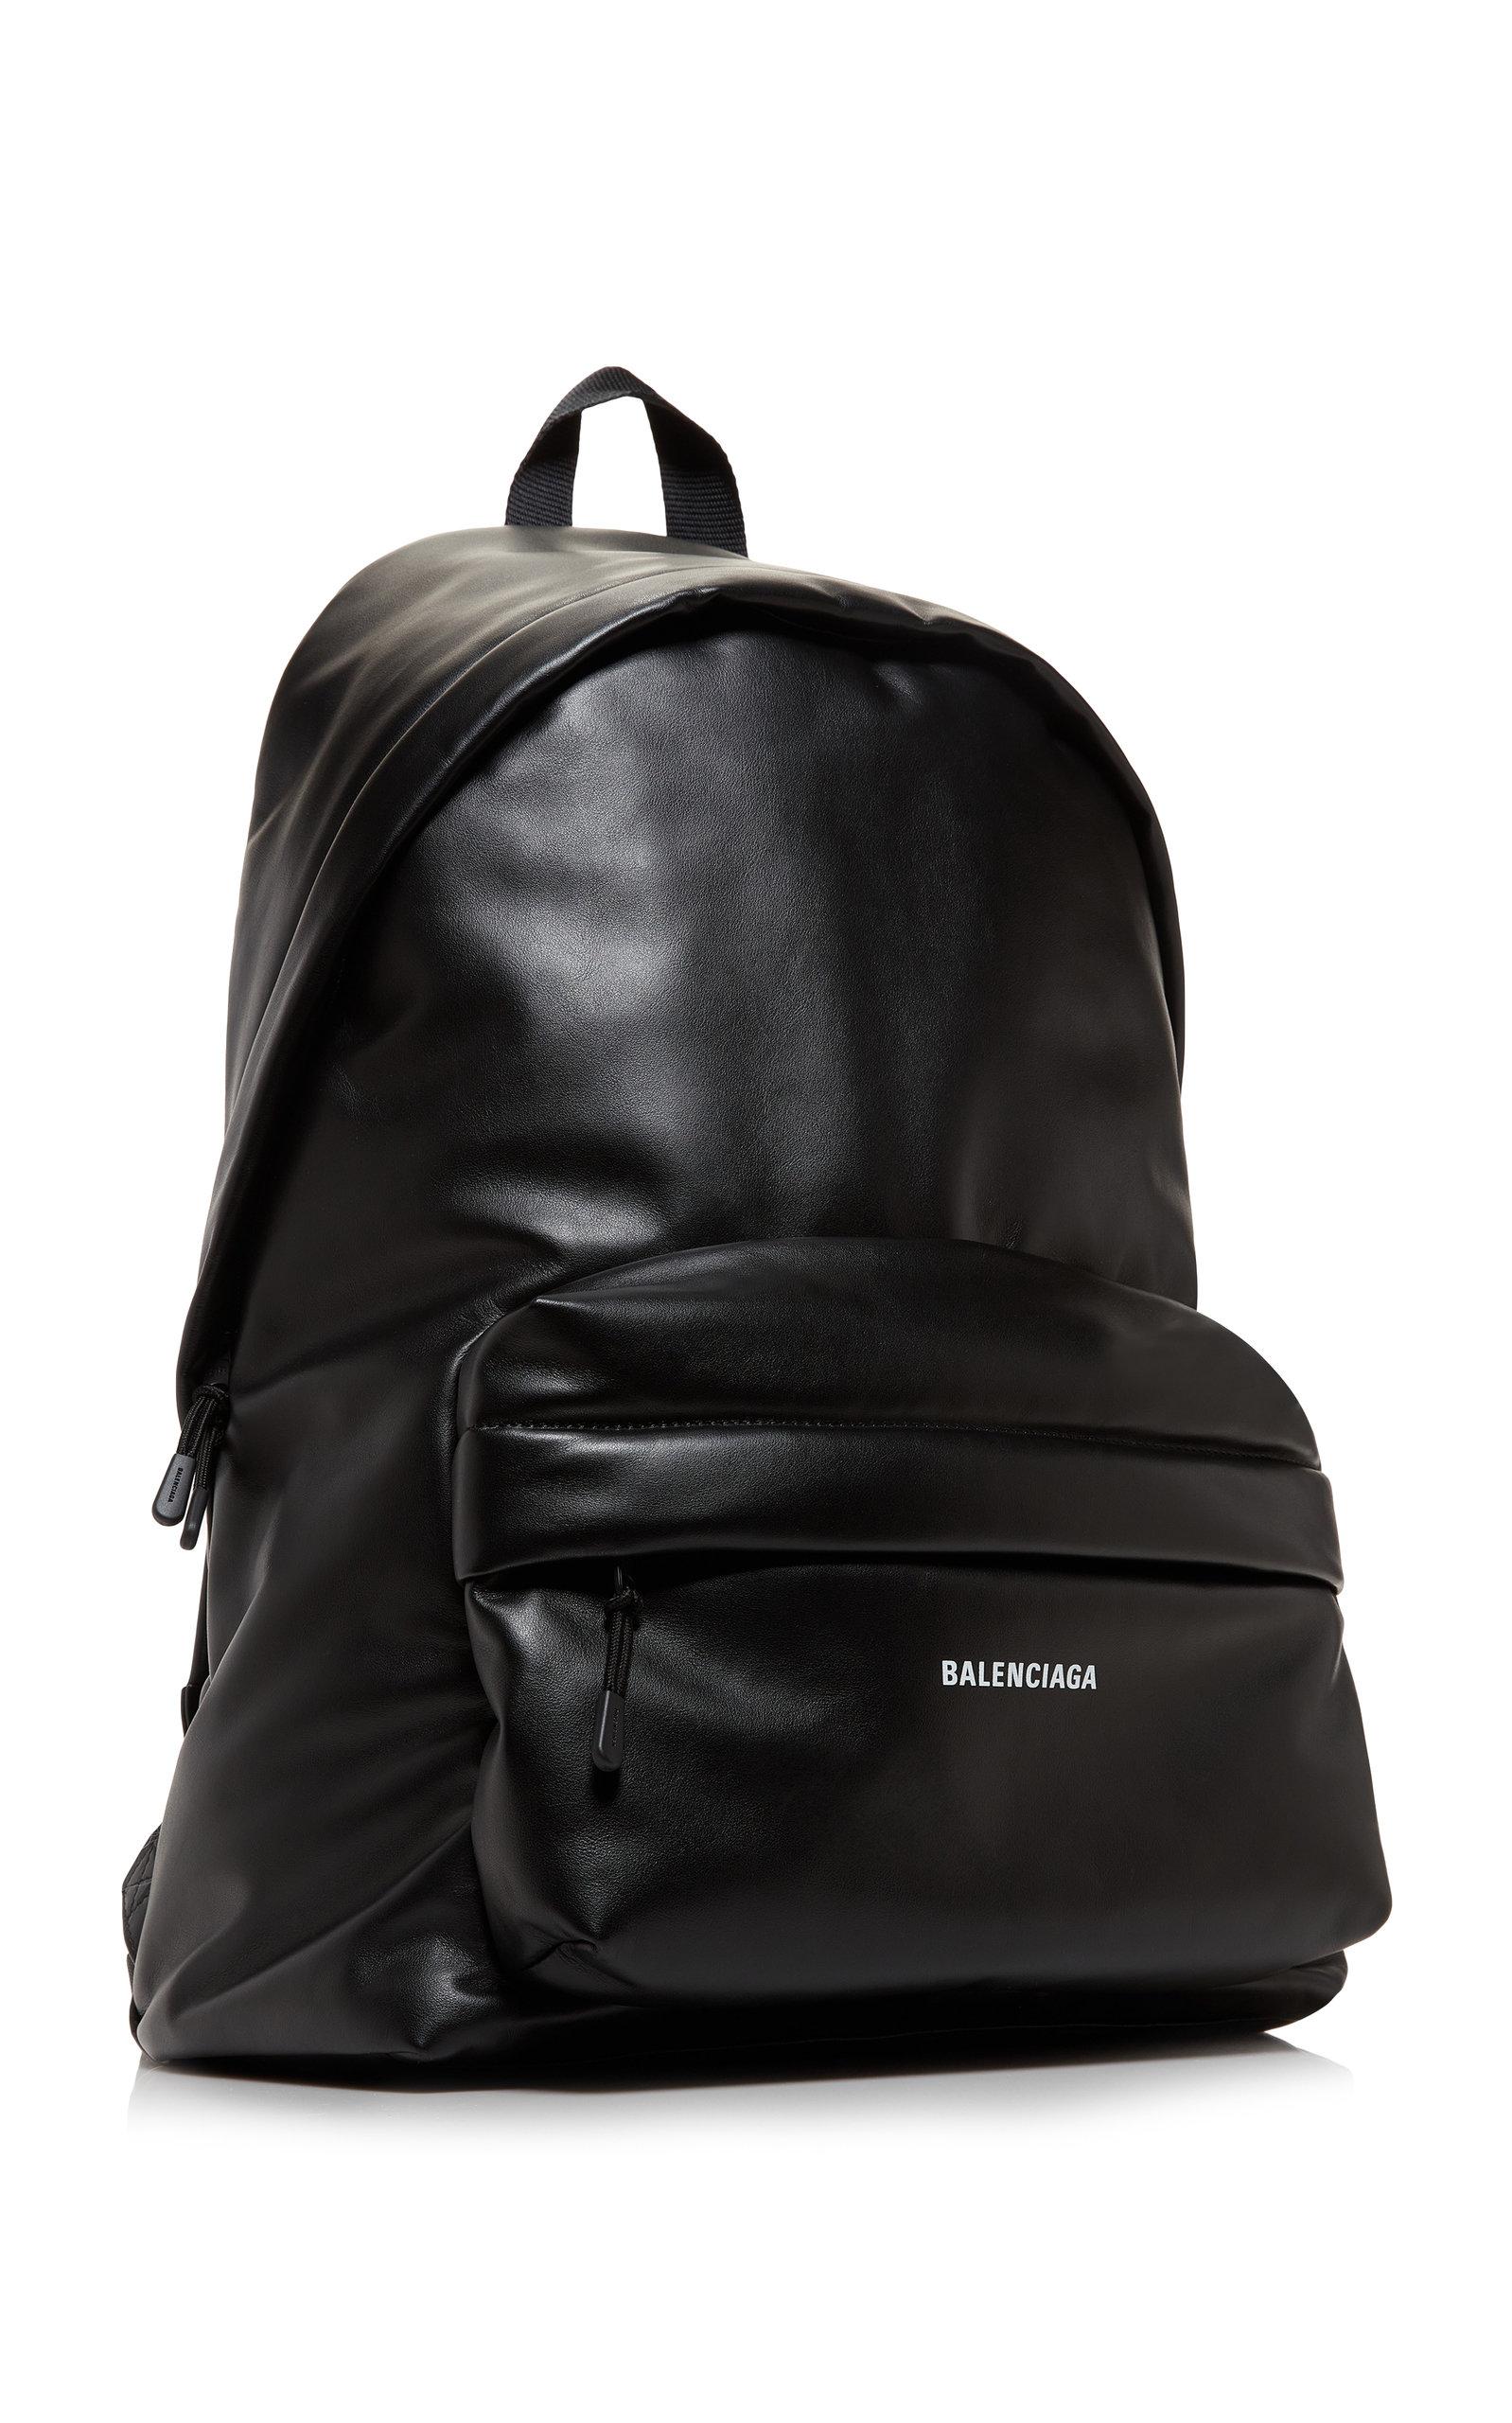 Balenciaga Puffy Leather Backpack in Black | Lyst